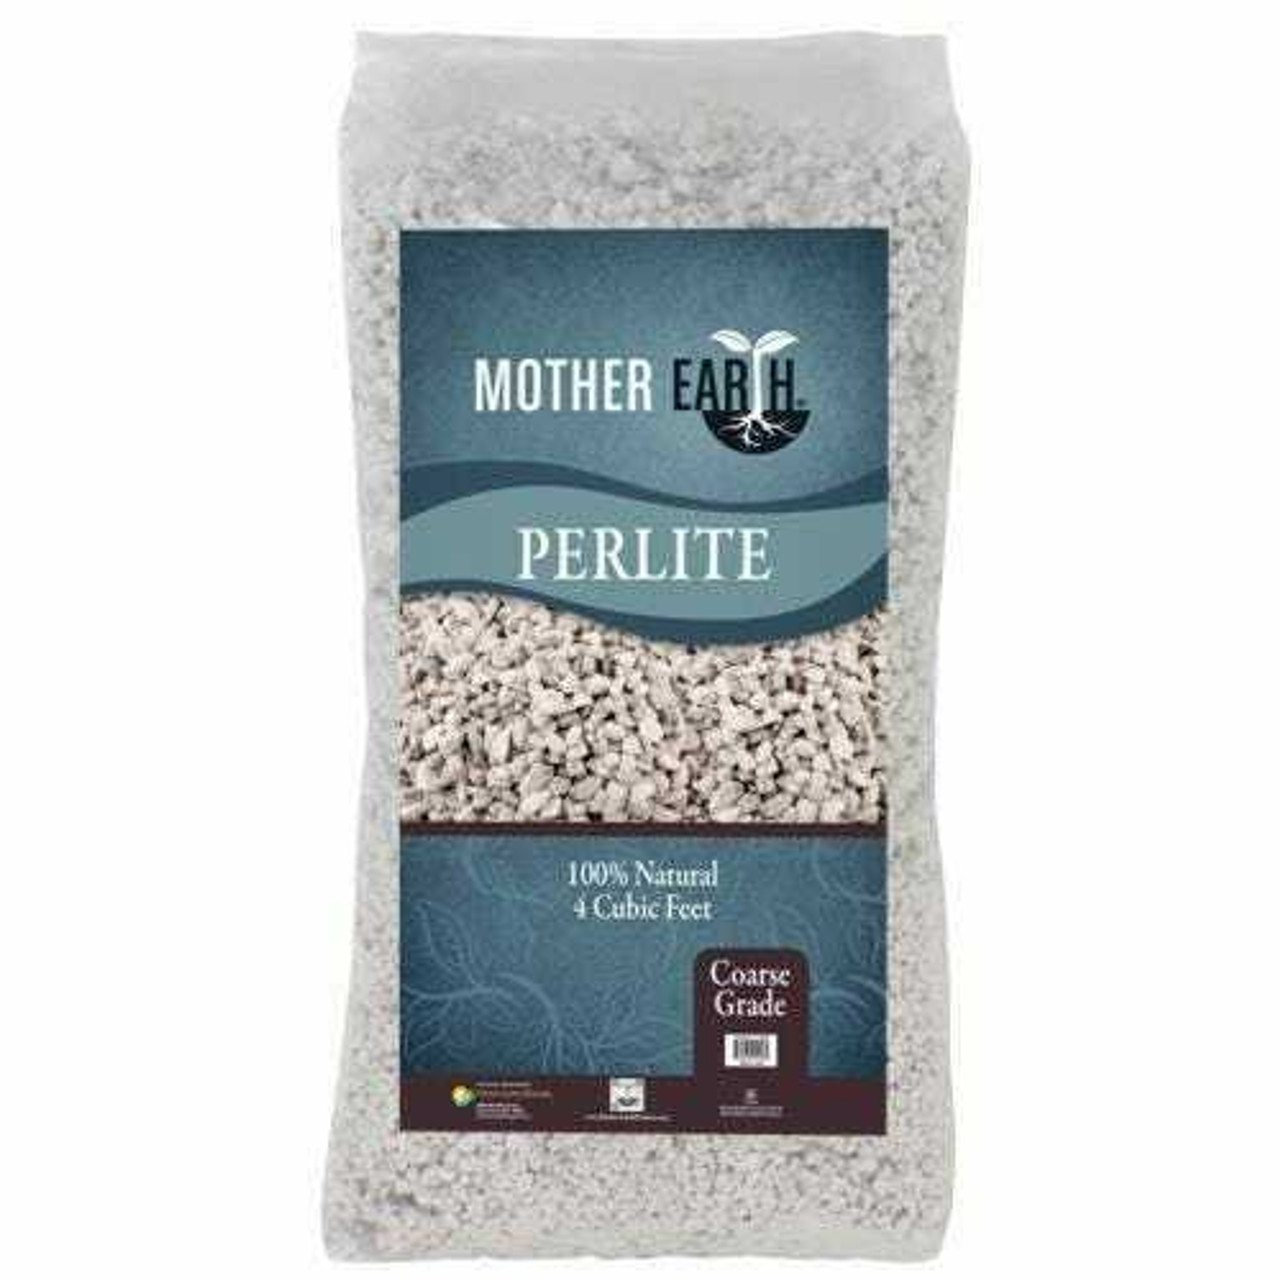 Mother Earth Coarse Perlite - 4 cu ft  (Freight/In-Store Pickup Only) - 1